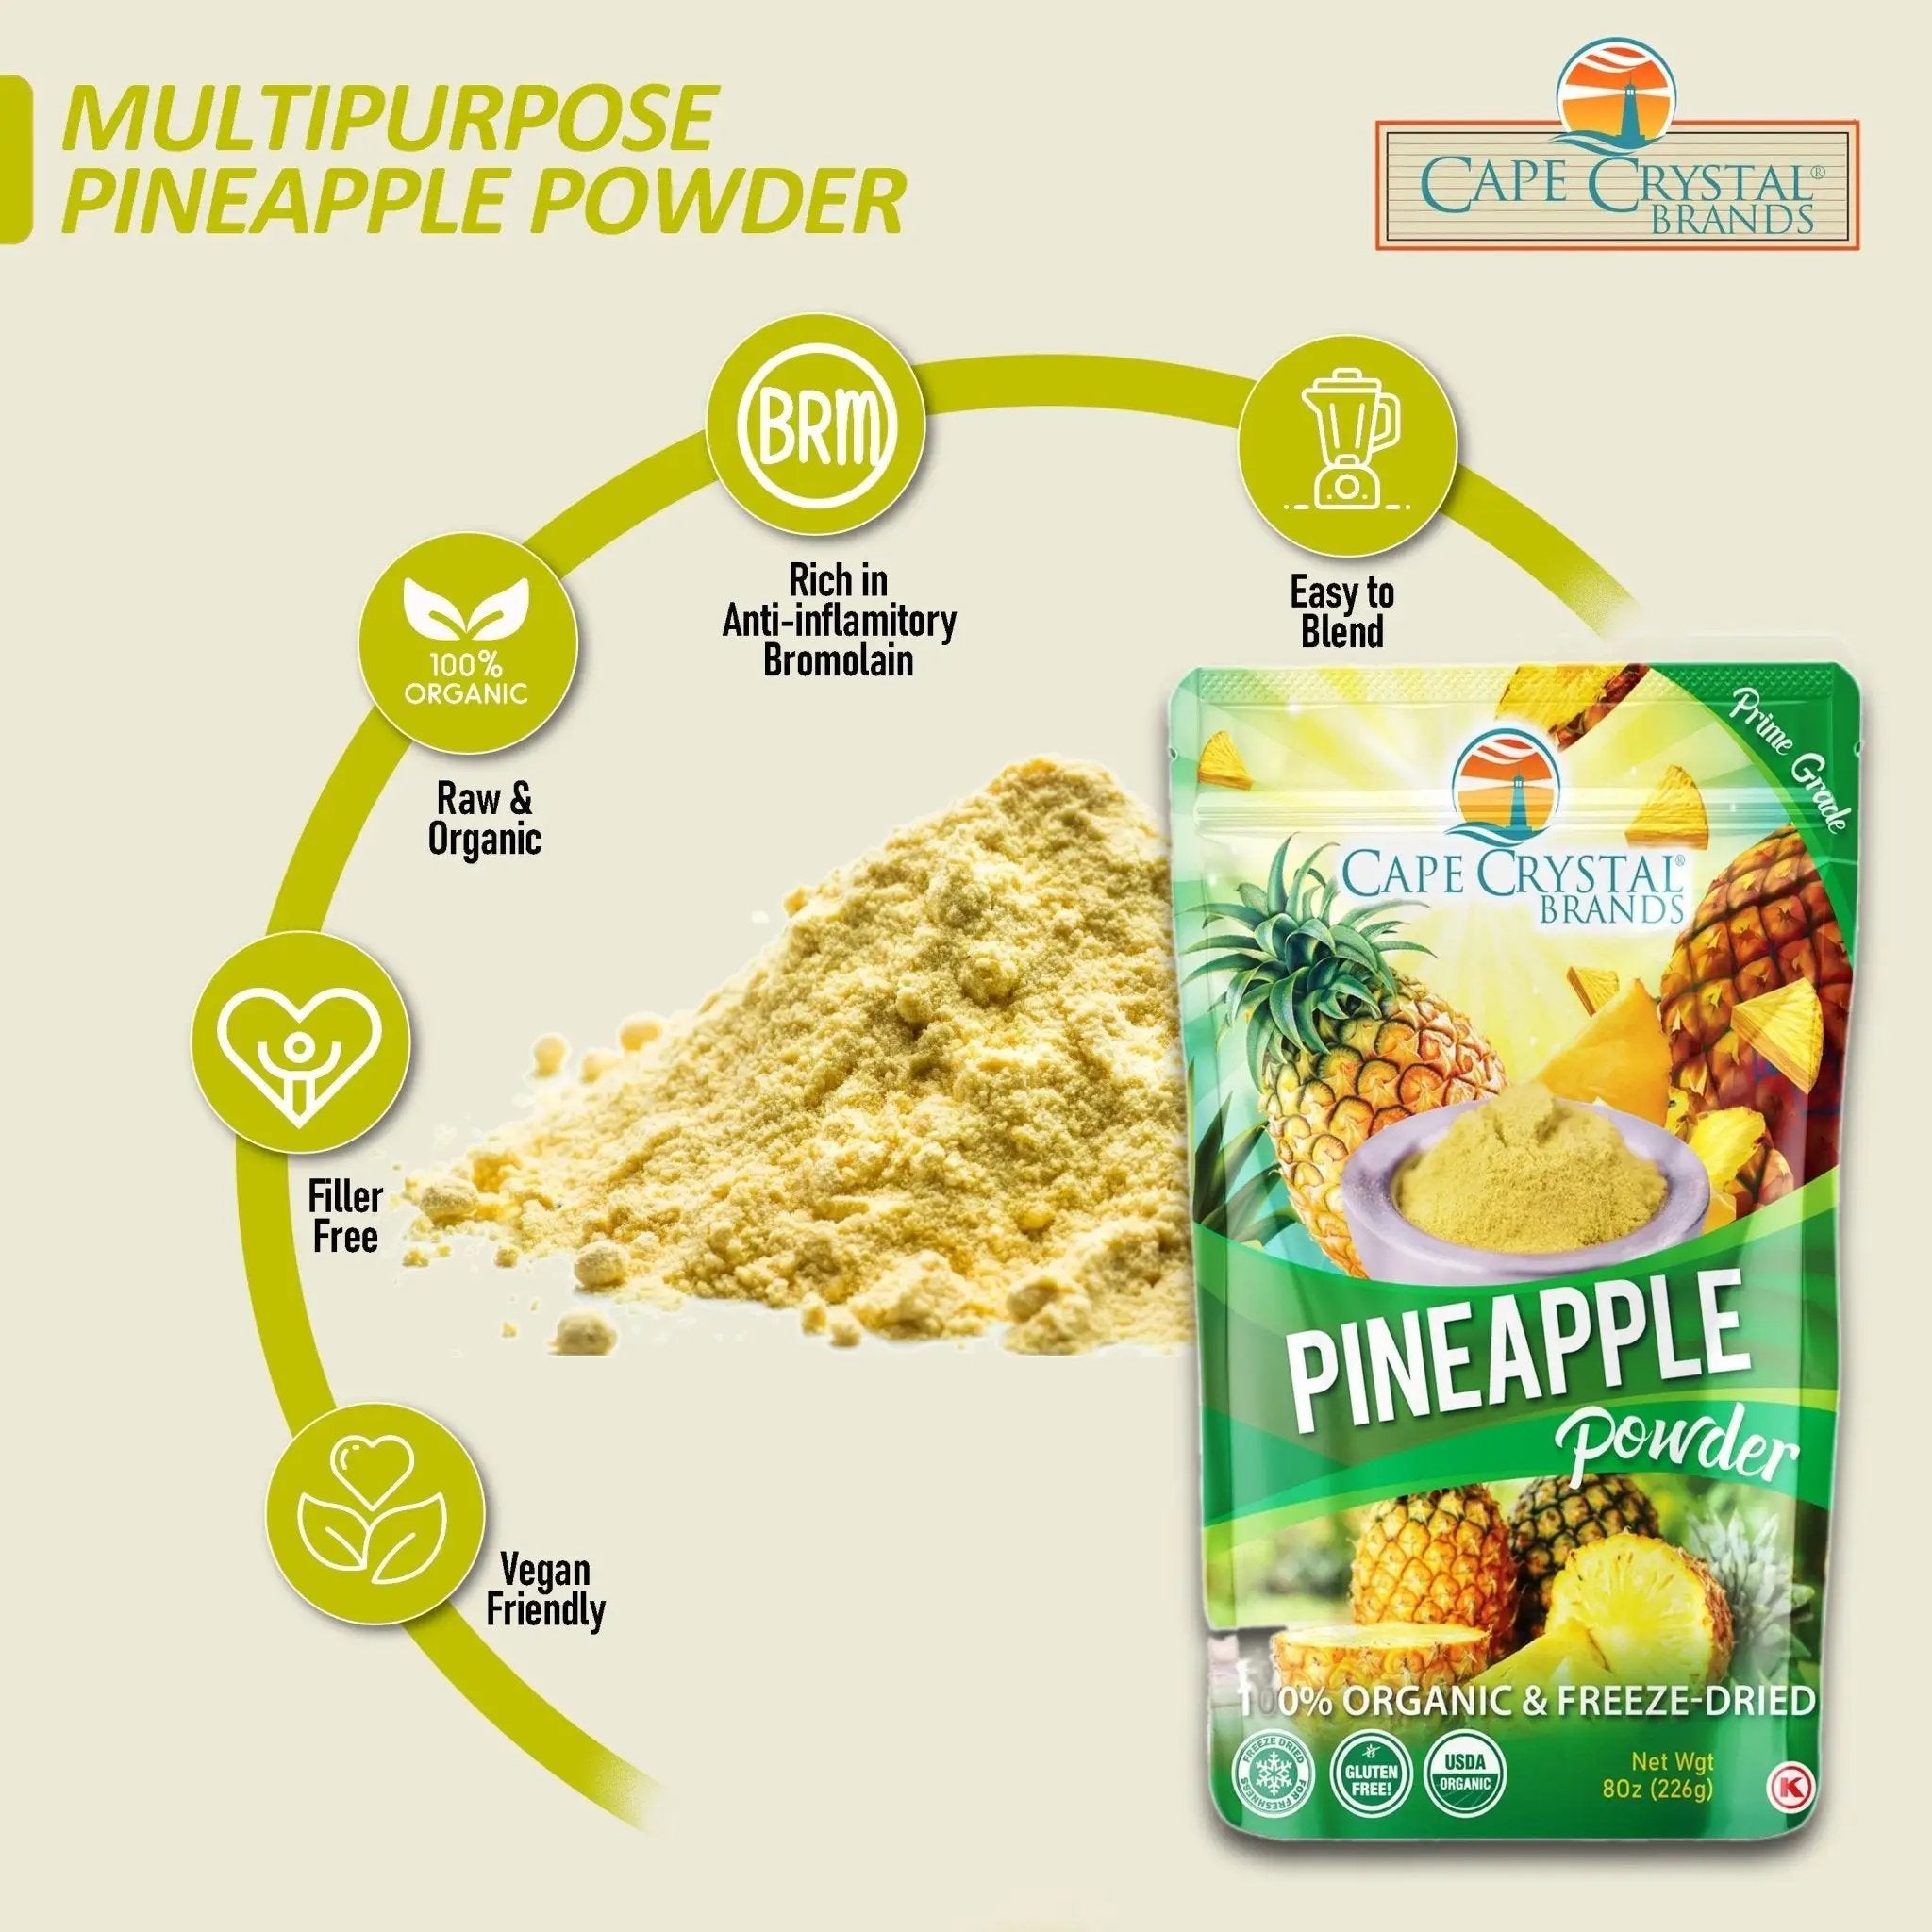 Cape Crystal Pineapple Powder, 8 Ounce, USDA Certified Organic, Non-GMO, Vegan, Freeze-Dried, High in Inflammation Reducing Bromelain and a Rich Immune System Booster, Wonderful Flavoring for Drinks, Baking and Cooking - Cape Crystal Brands